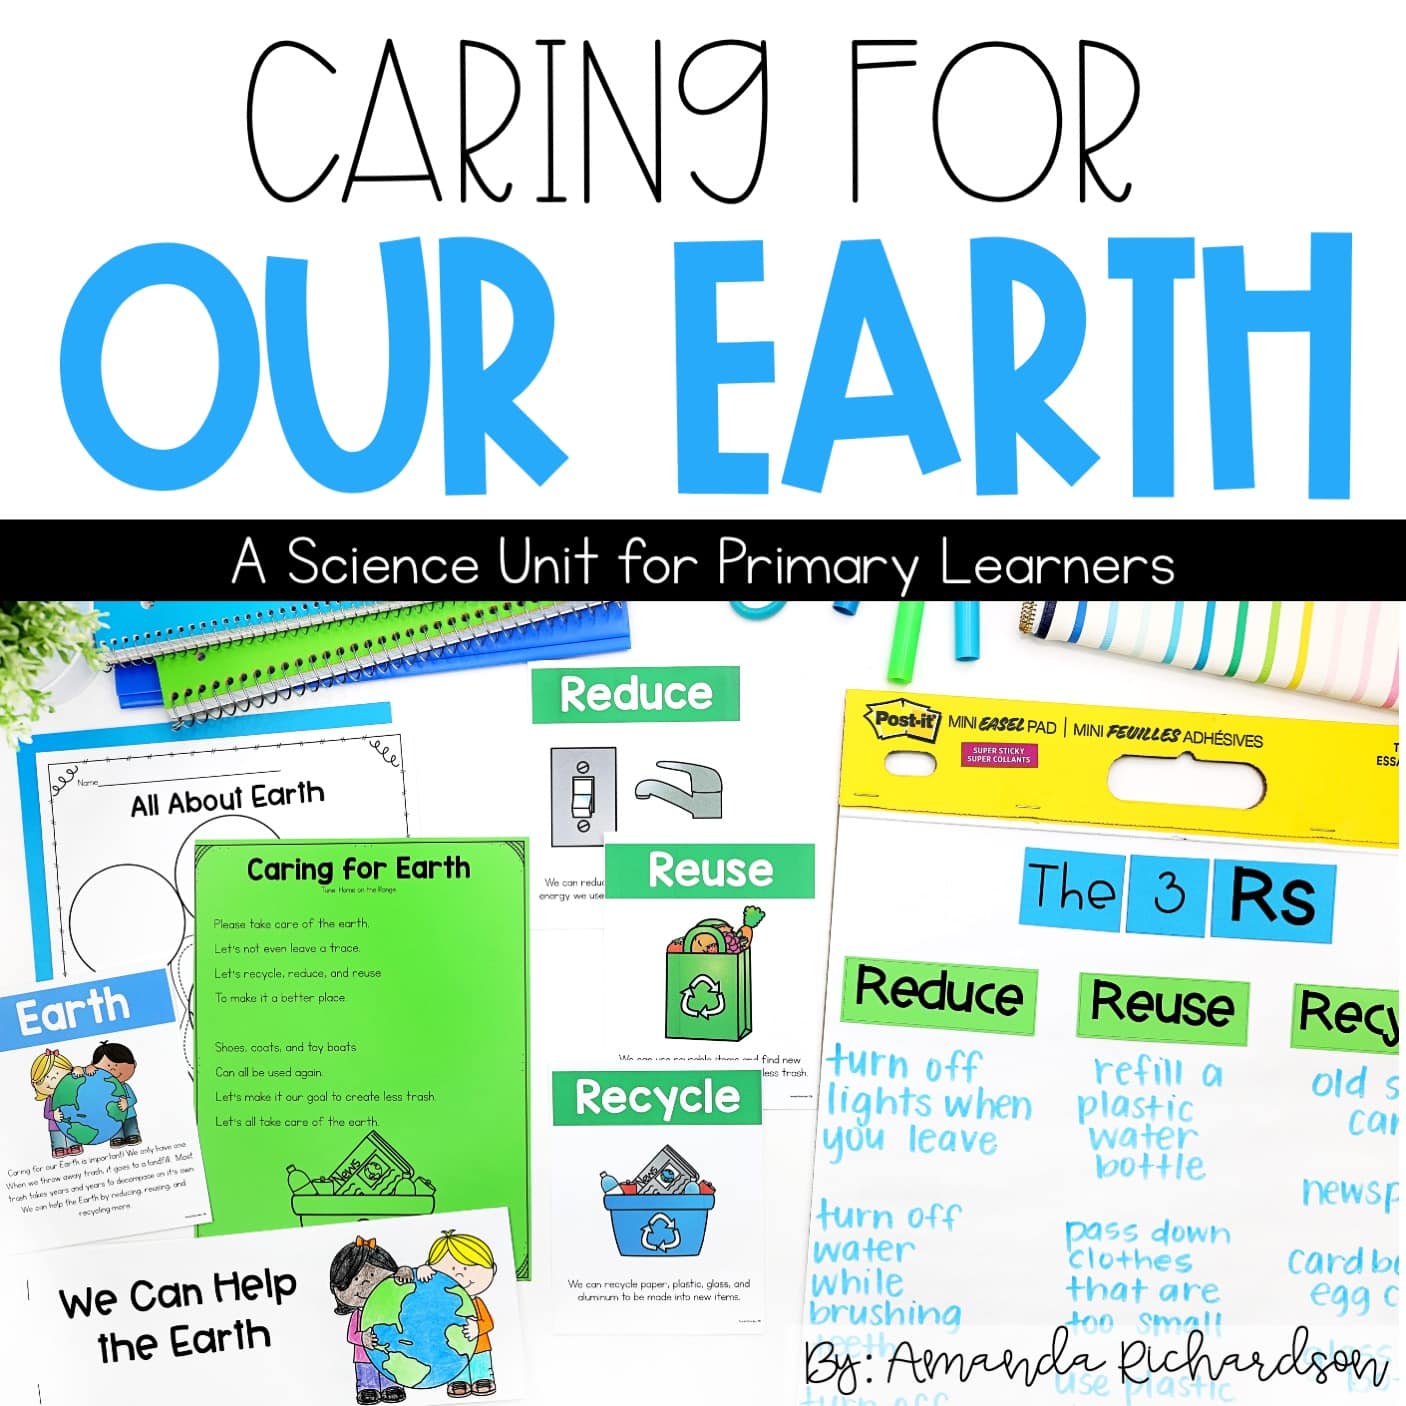 Reduce, Reuse and Recycle Earth Day STEM activities for kids